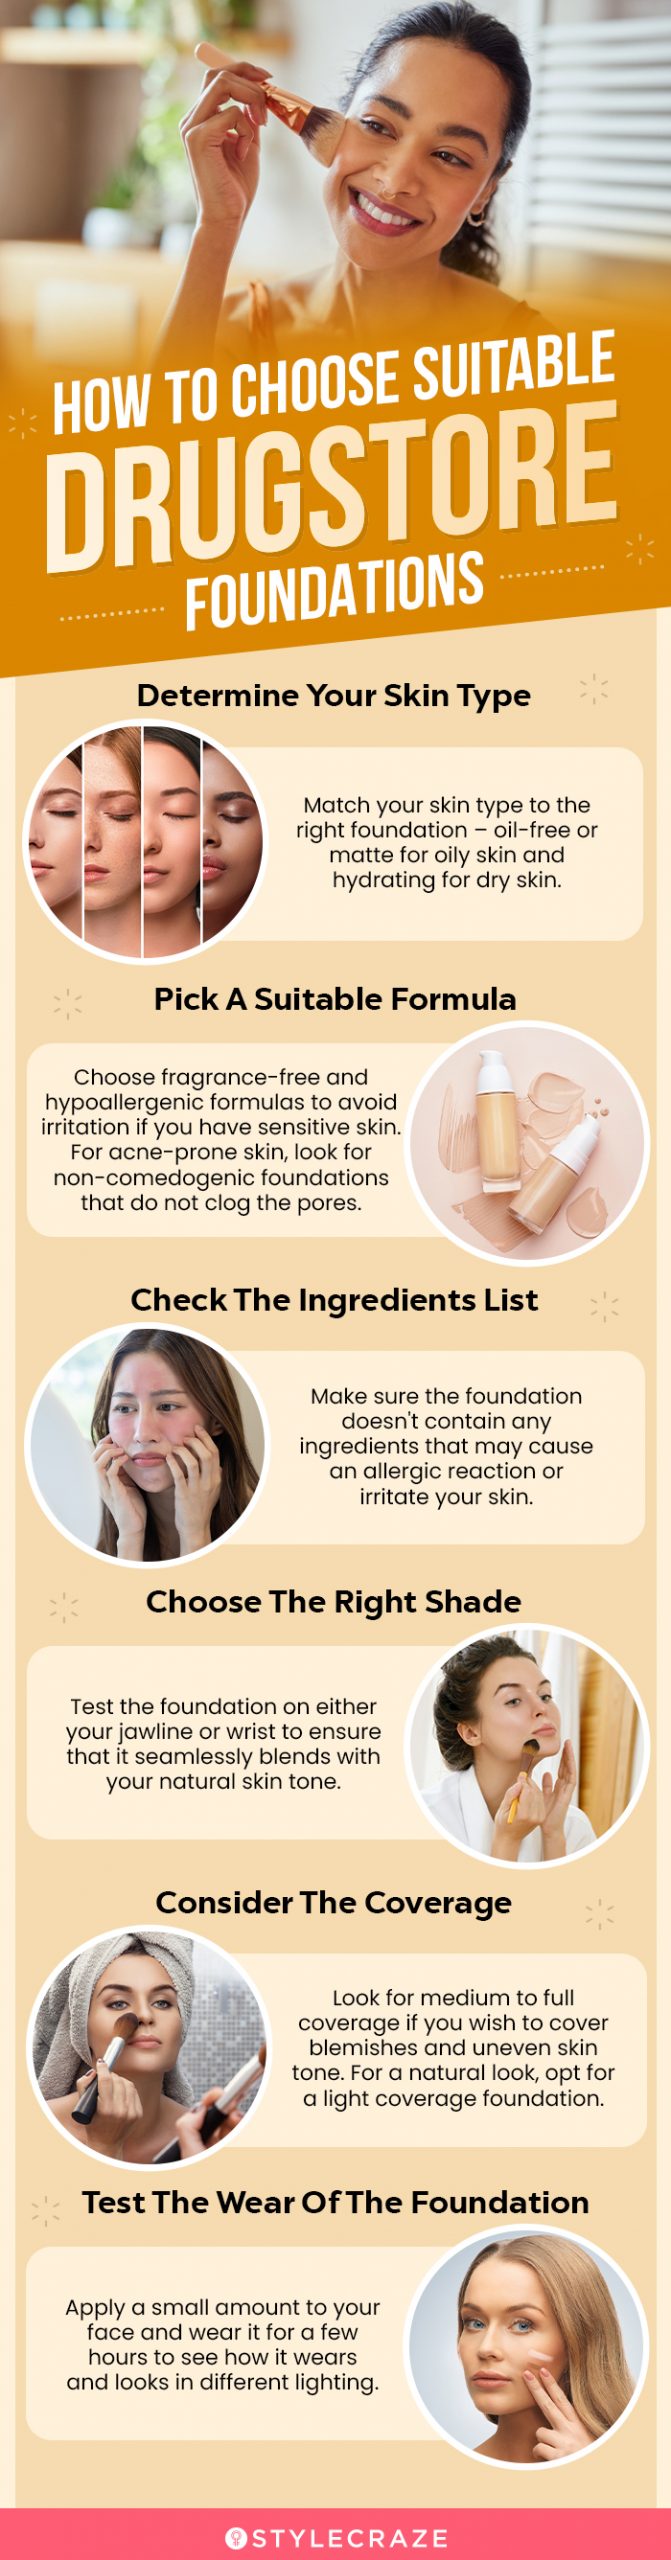 How To Choose Suitable Drugstore Foundations (infographic)